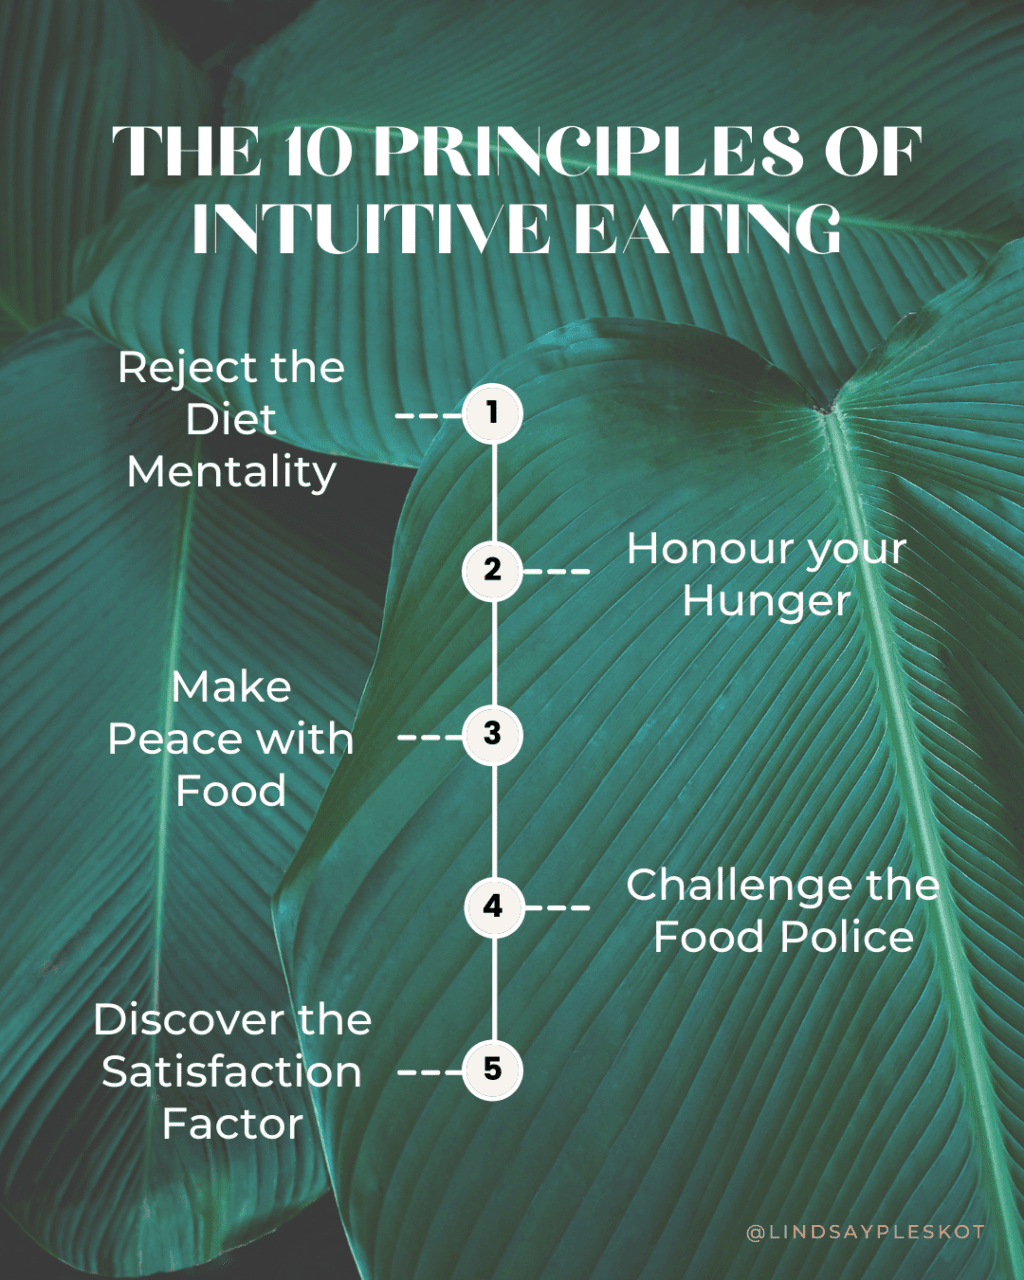 A graphic showing a list of the first 5 out of 10 principles of intuitive eating.